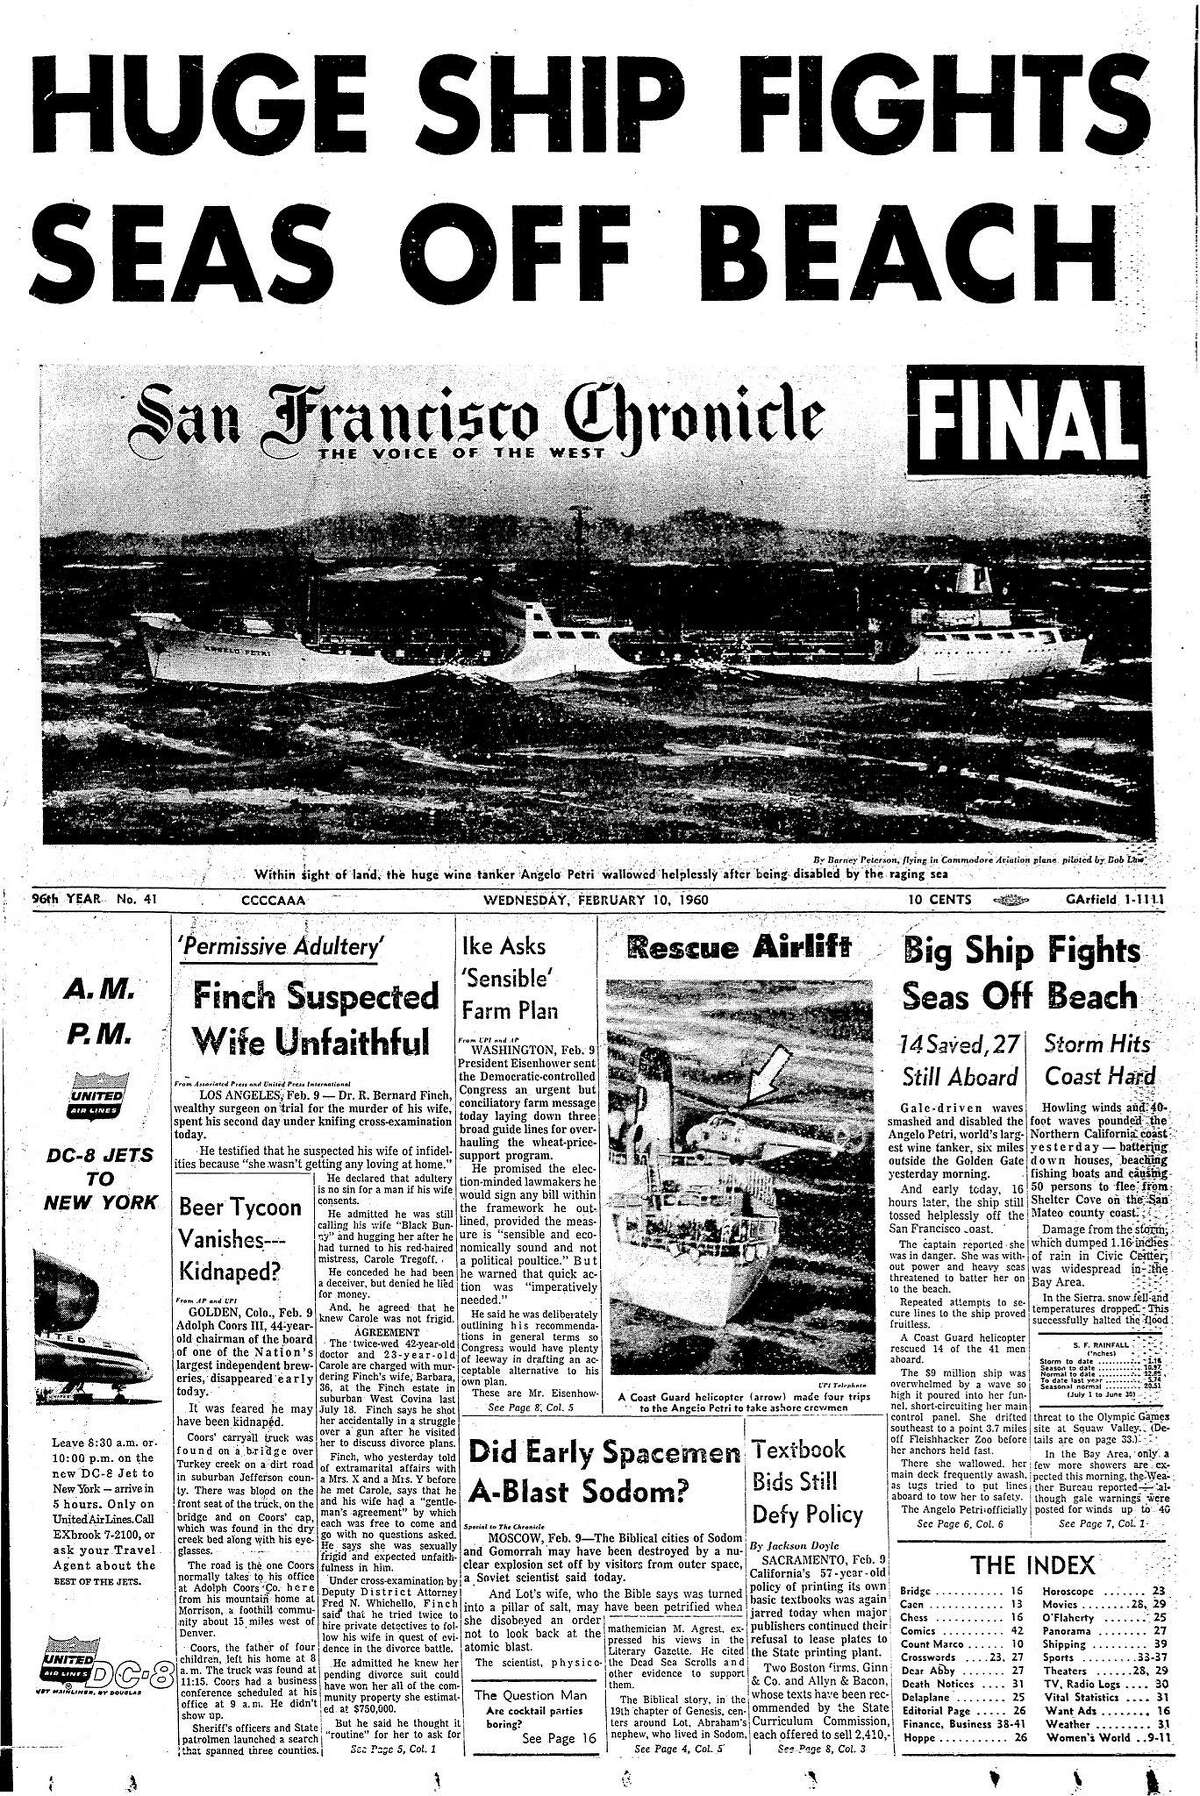 The S.S. Angelo Petri in distress off the San Francisco coast. Front page 02/10/1960,